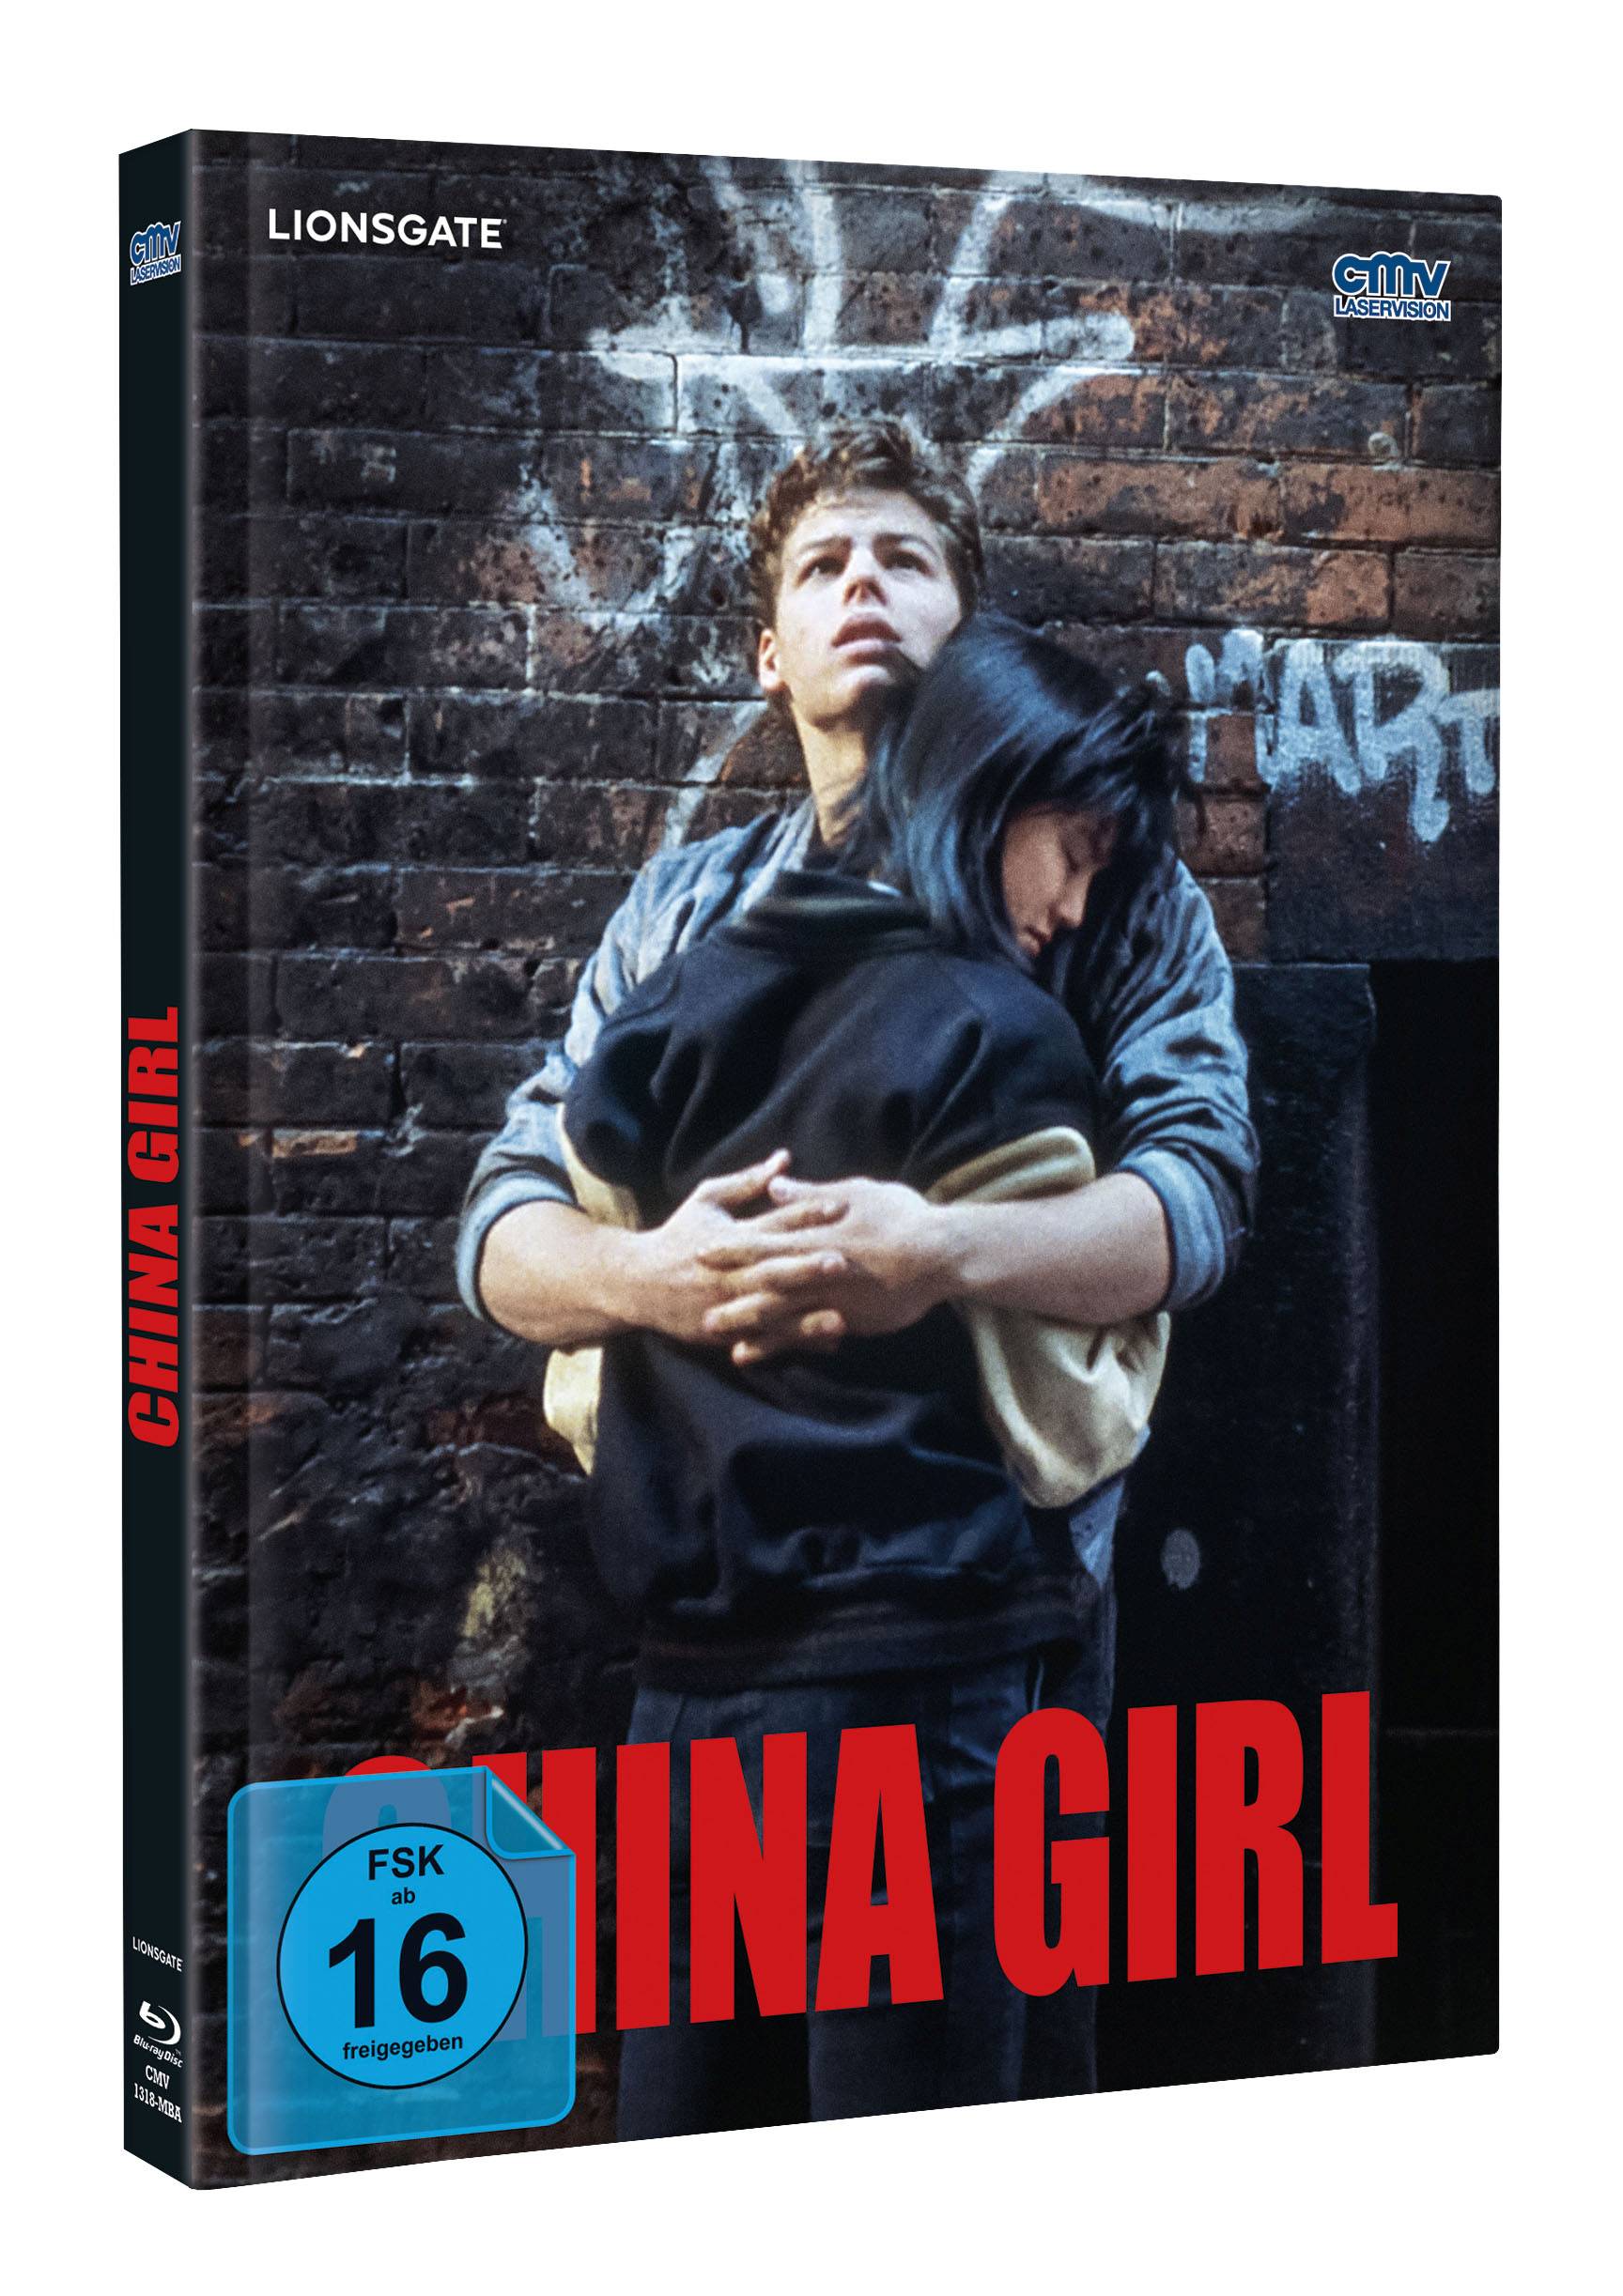 China Girl (Blu-ray + DVD) (Limitiertes Mediabook) (Cover A)